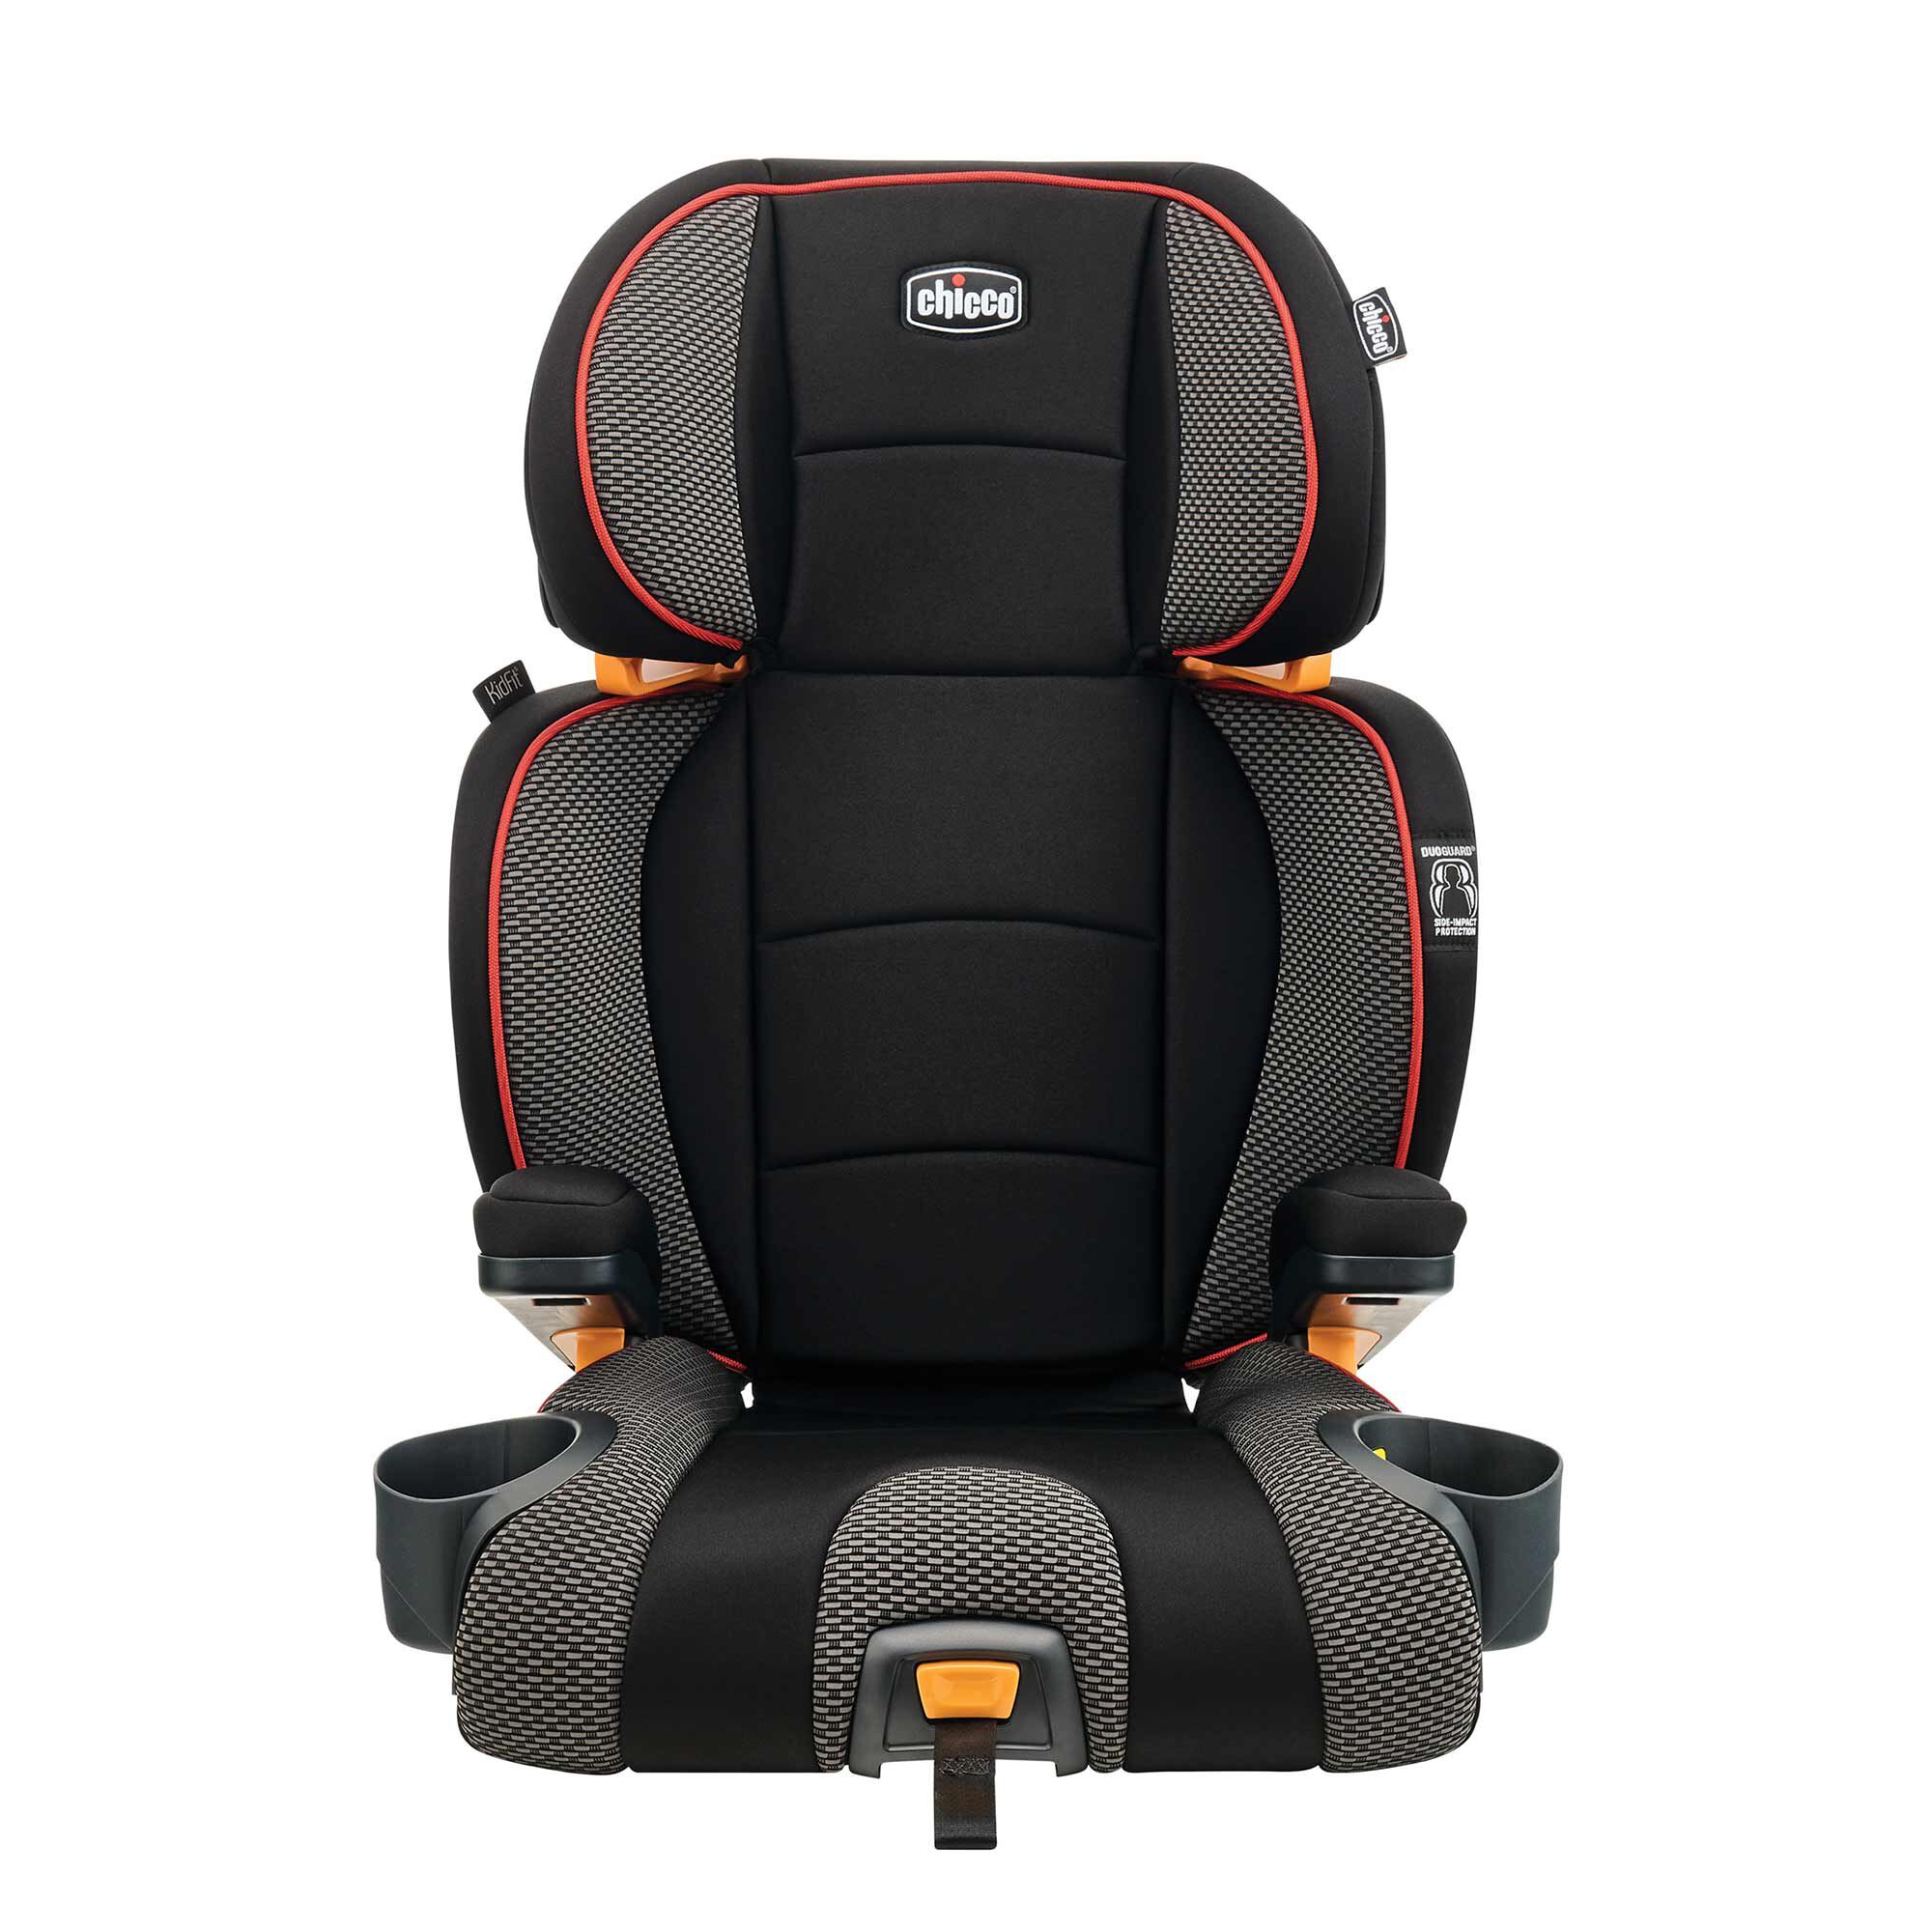 https://www.chiccousa.com/dw/image/v2/AAMT_PRD/on/demandware.static/-/Sites-chicco_catalog/default/dw463fc2c3/images/products/Gear/kidfit/chicco-kidfit-car-seat-atmosphere-front.jpg?sw=2000&sh=2000&sm=fit